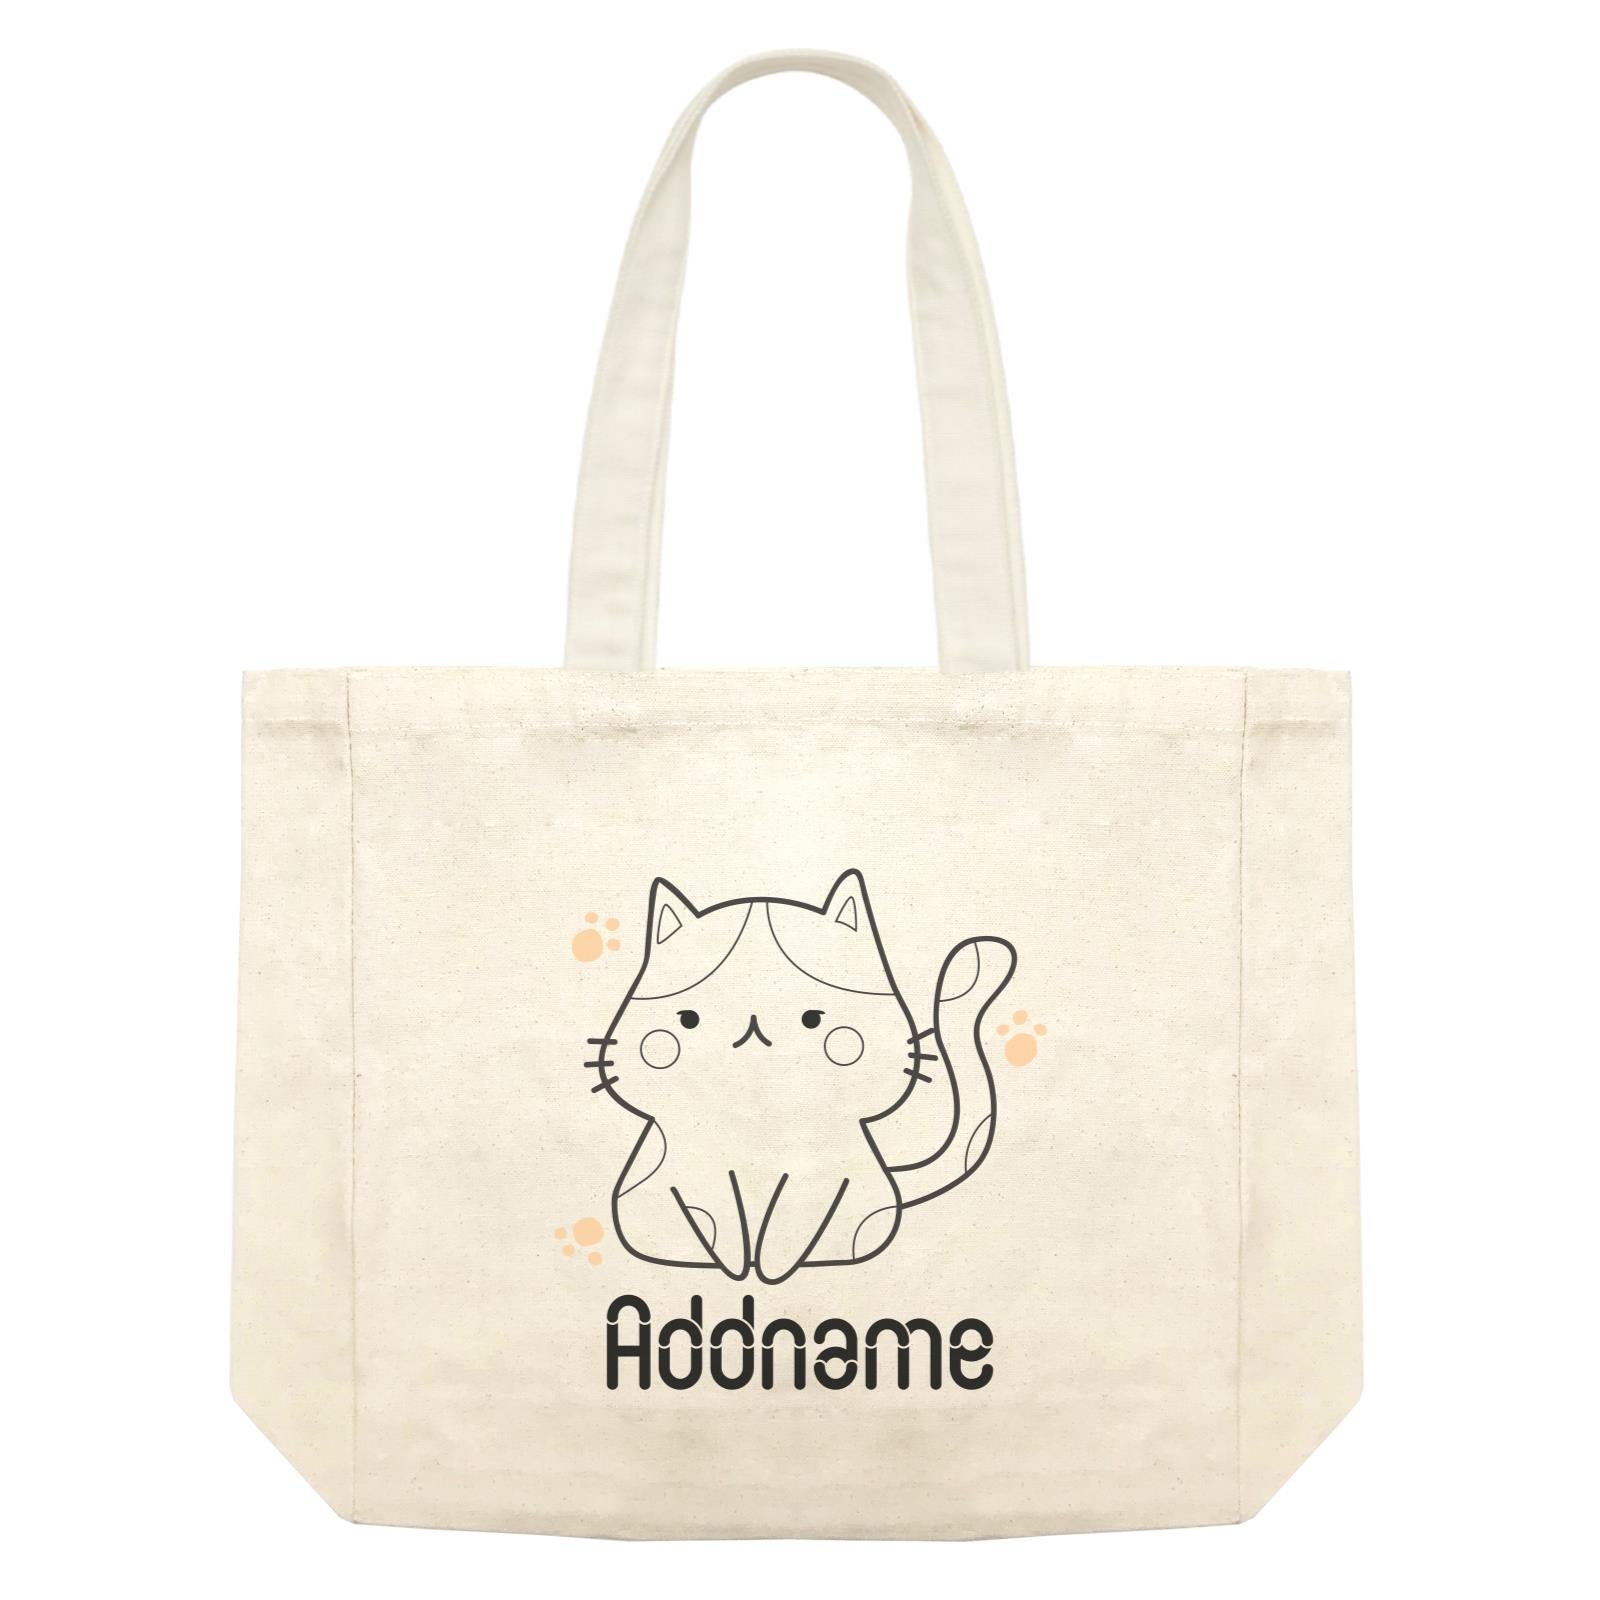 Coloring Outline Cute Hand Drawn Animals Cats Cat Addname Shopping Bag